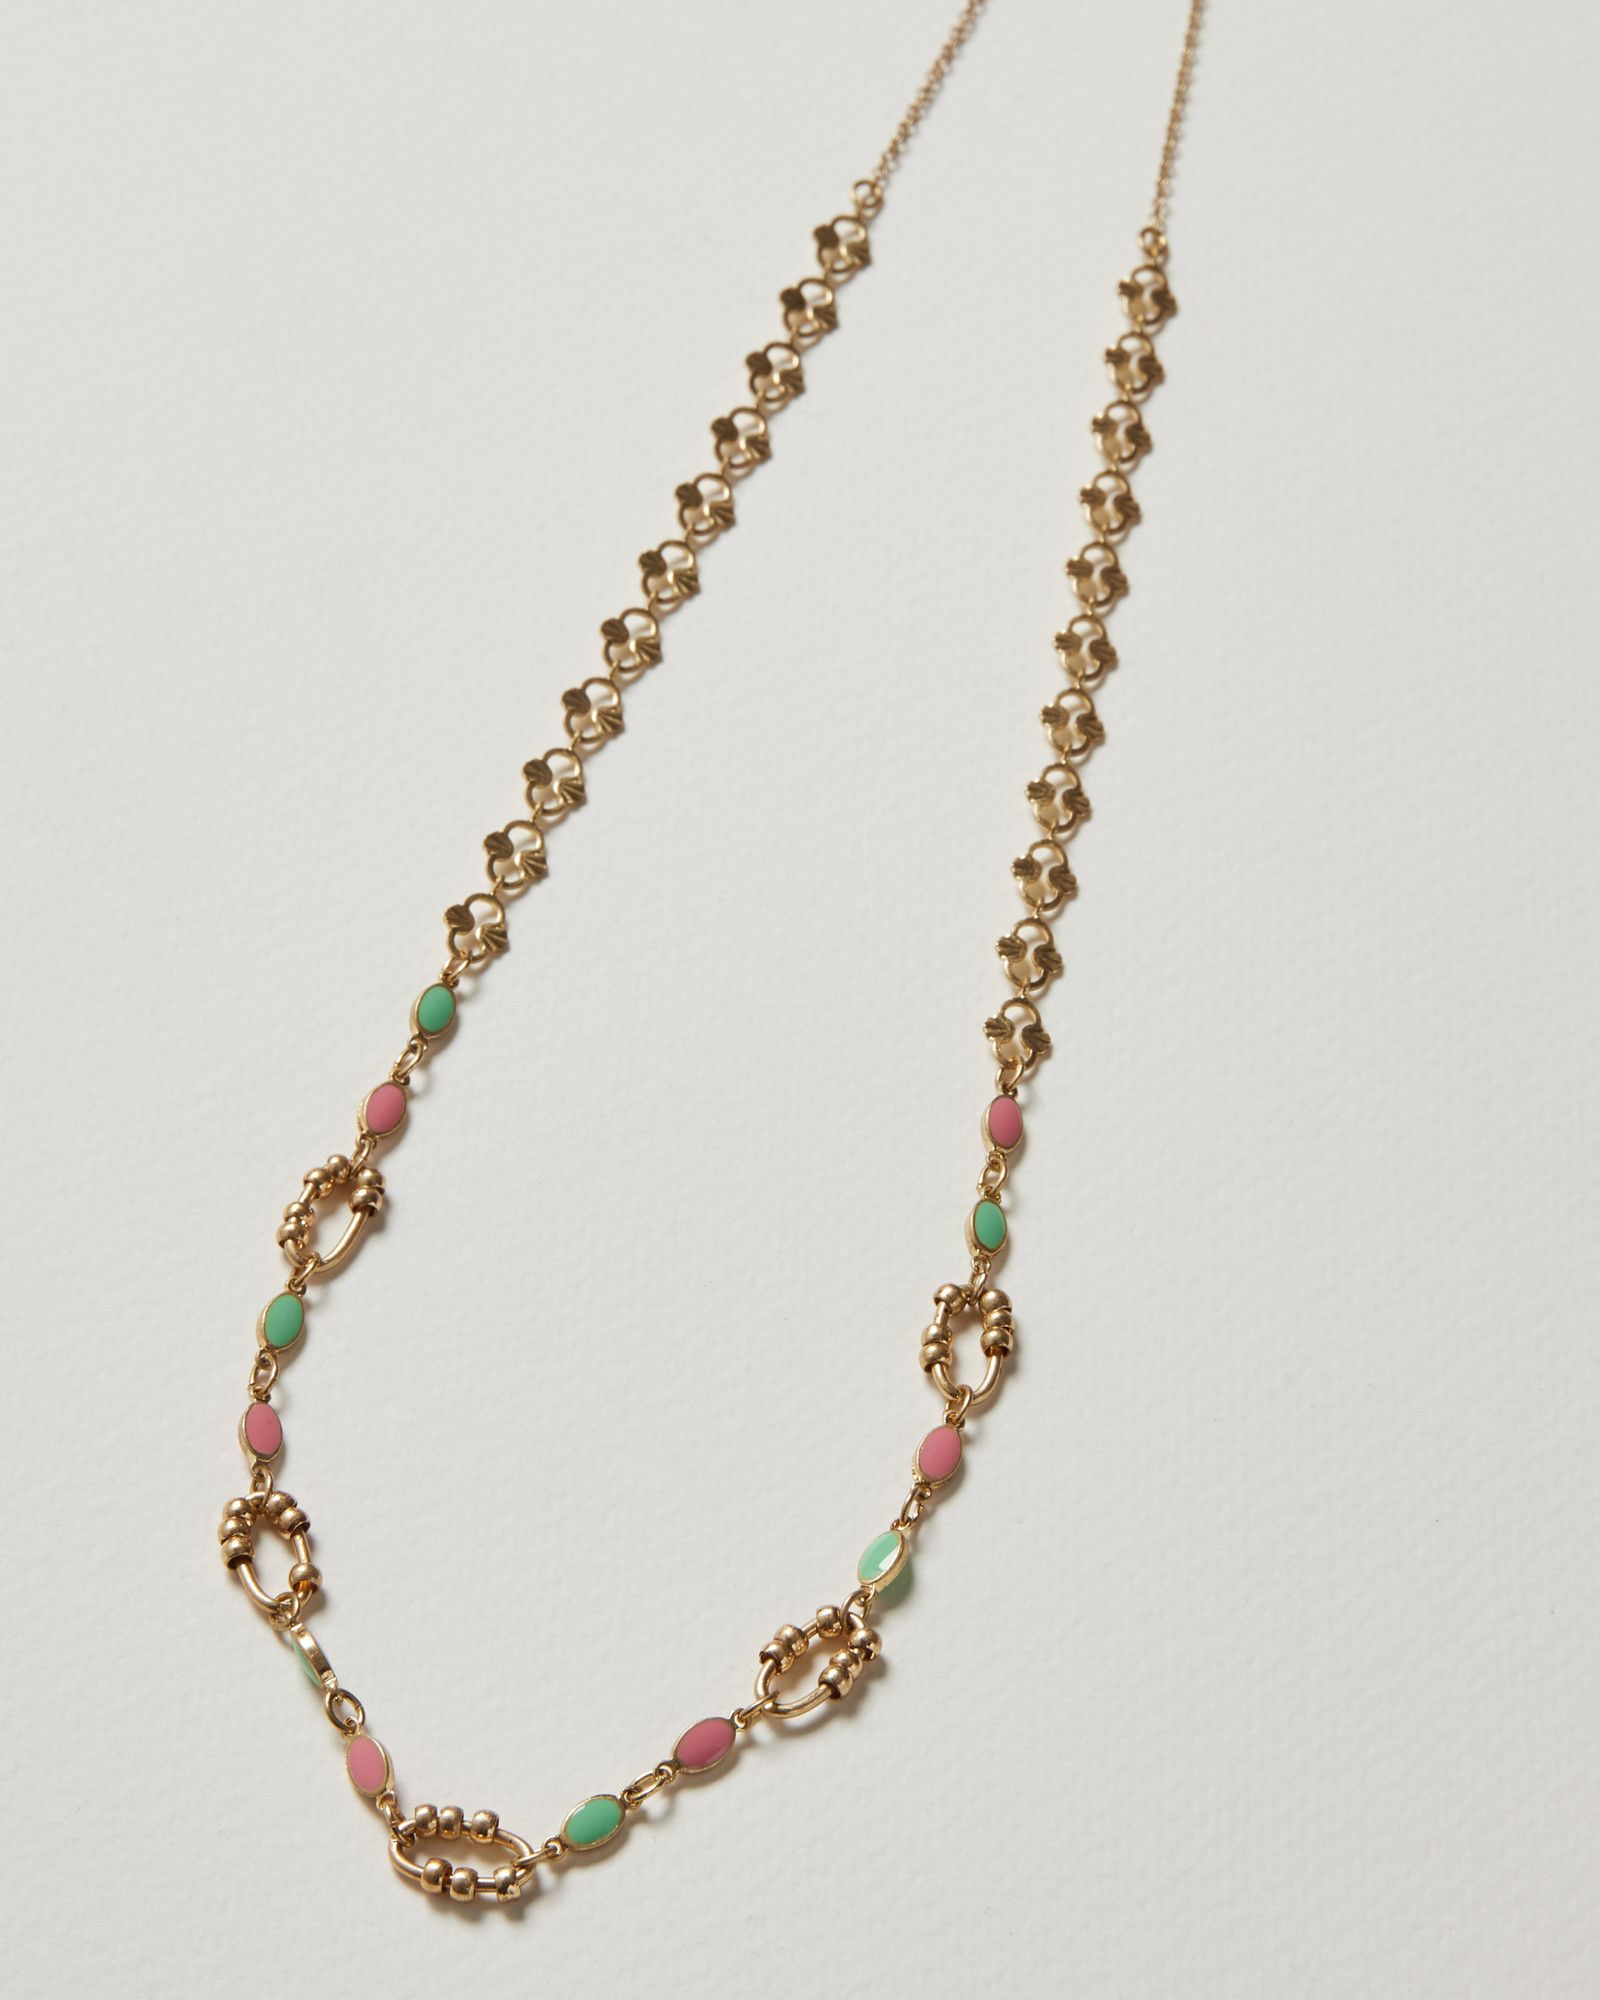 Florian Oval Bead & Loop Chain Necklace | Oliver Bonas